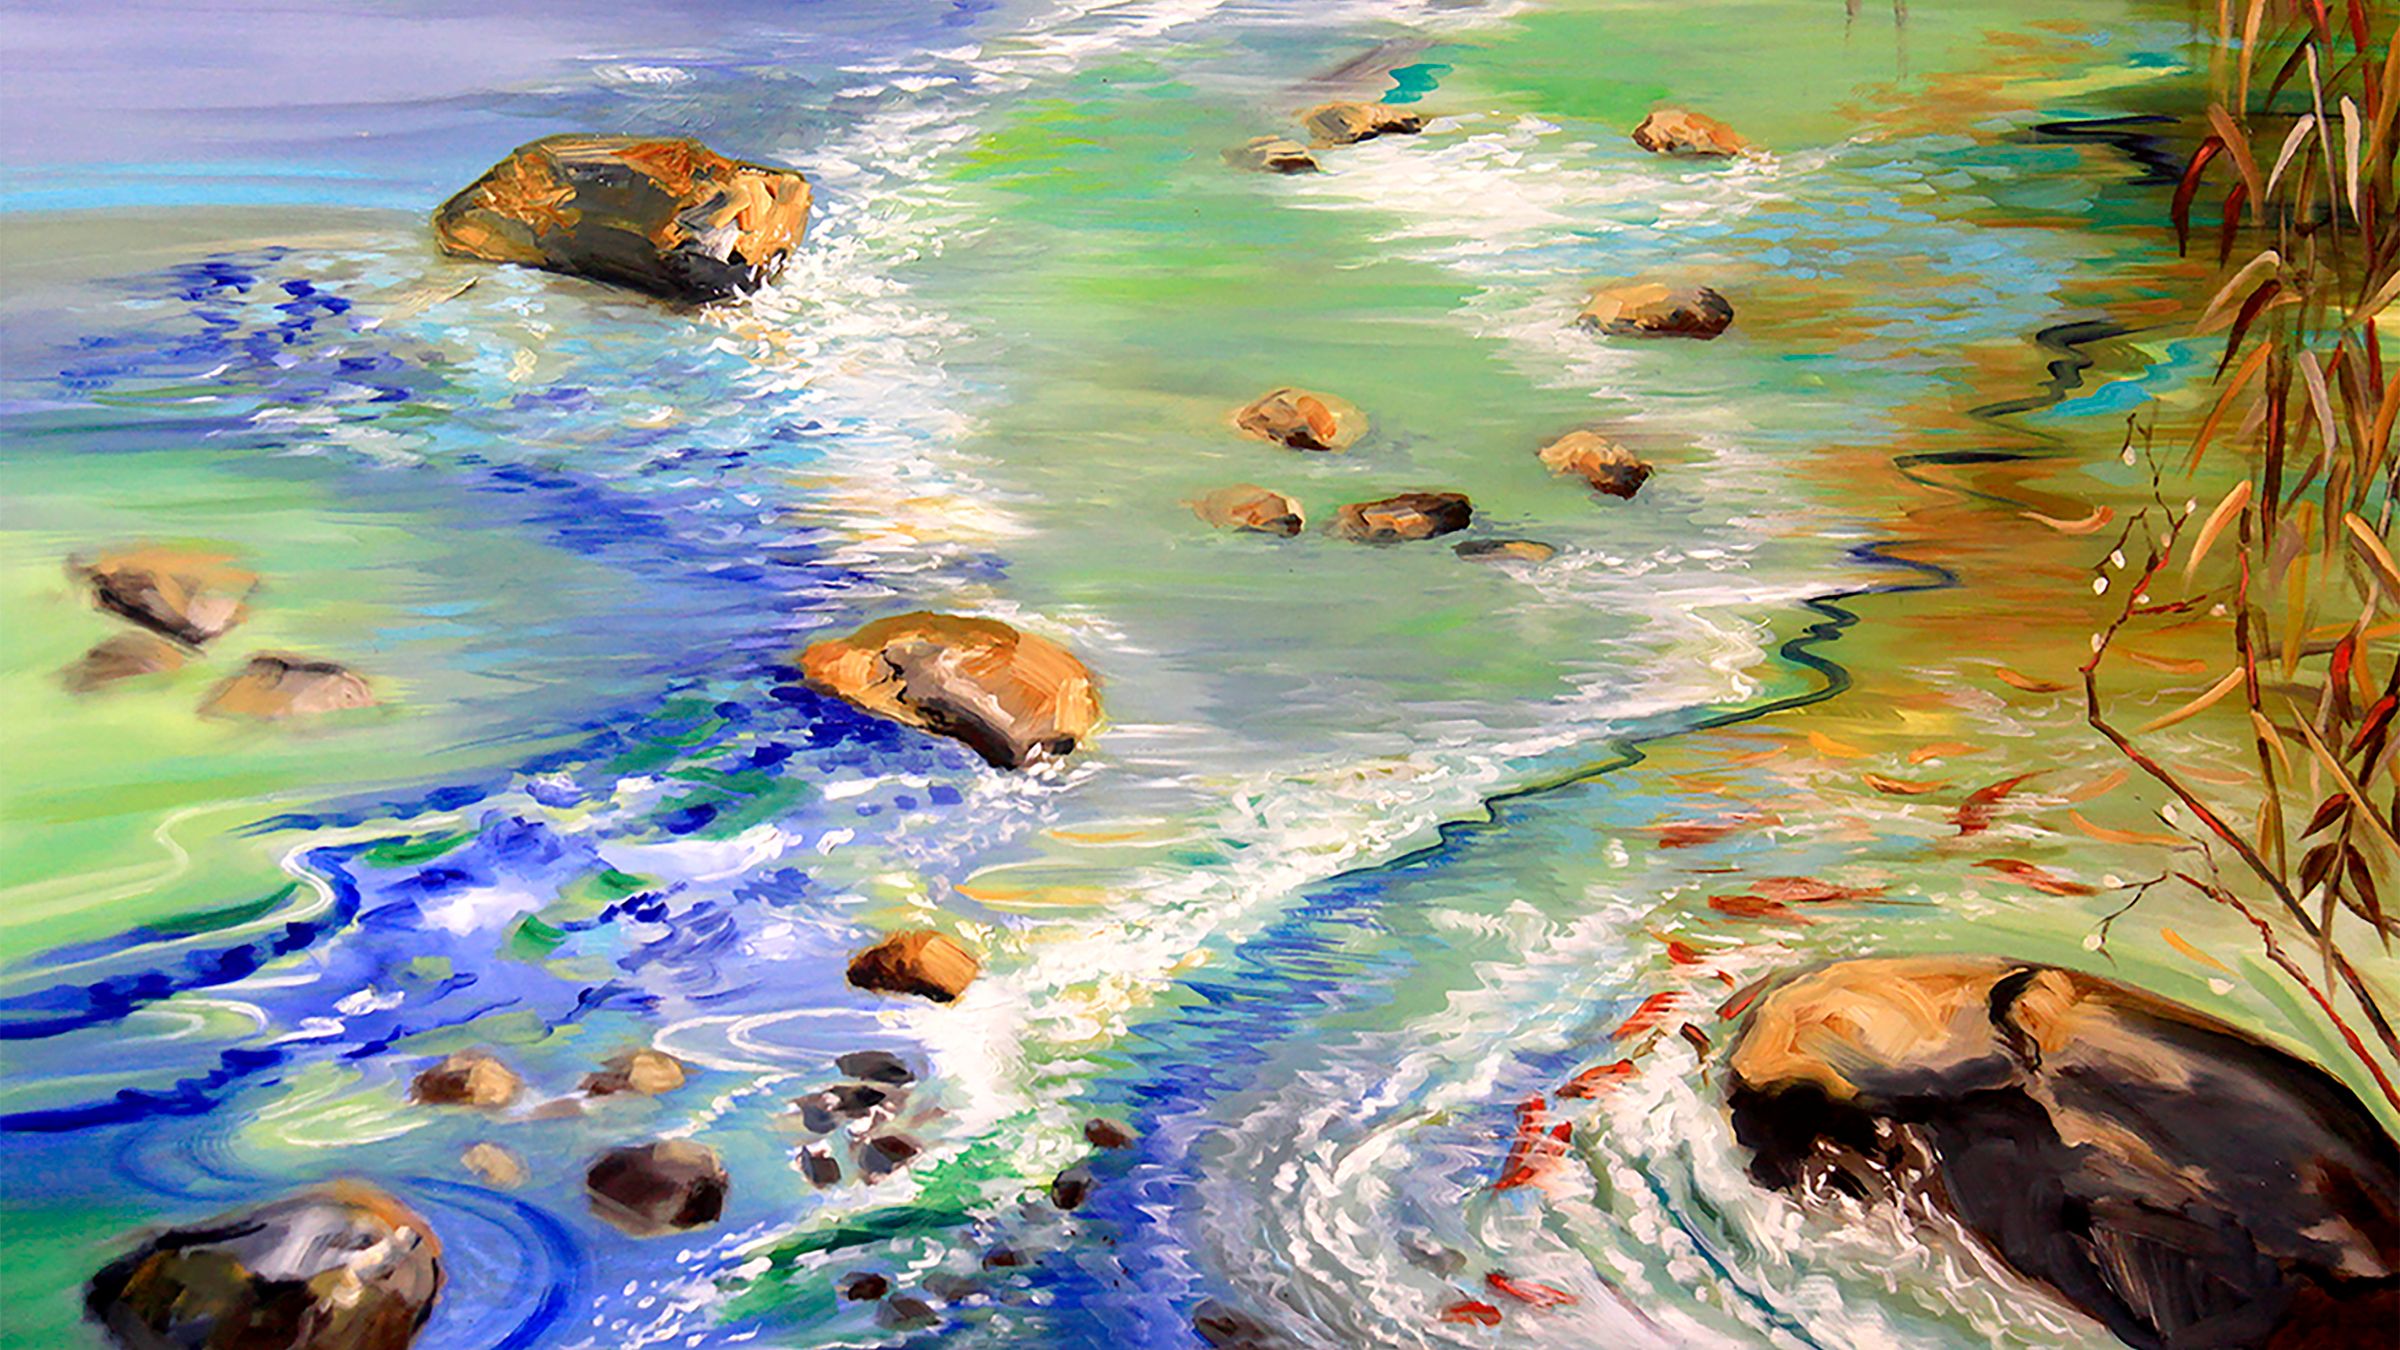 a painting by Jody Hawkins of a stream in shades of blue and green with golden brown rocks breaking through the shallow water